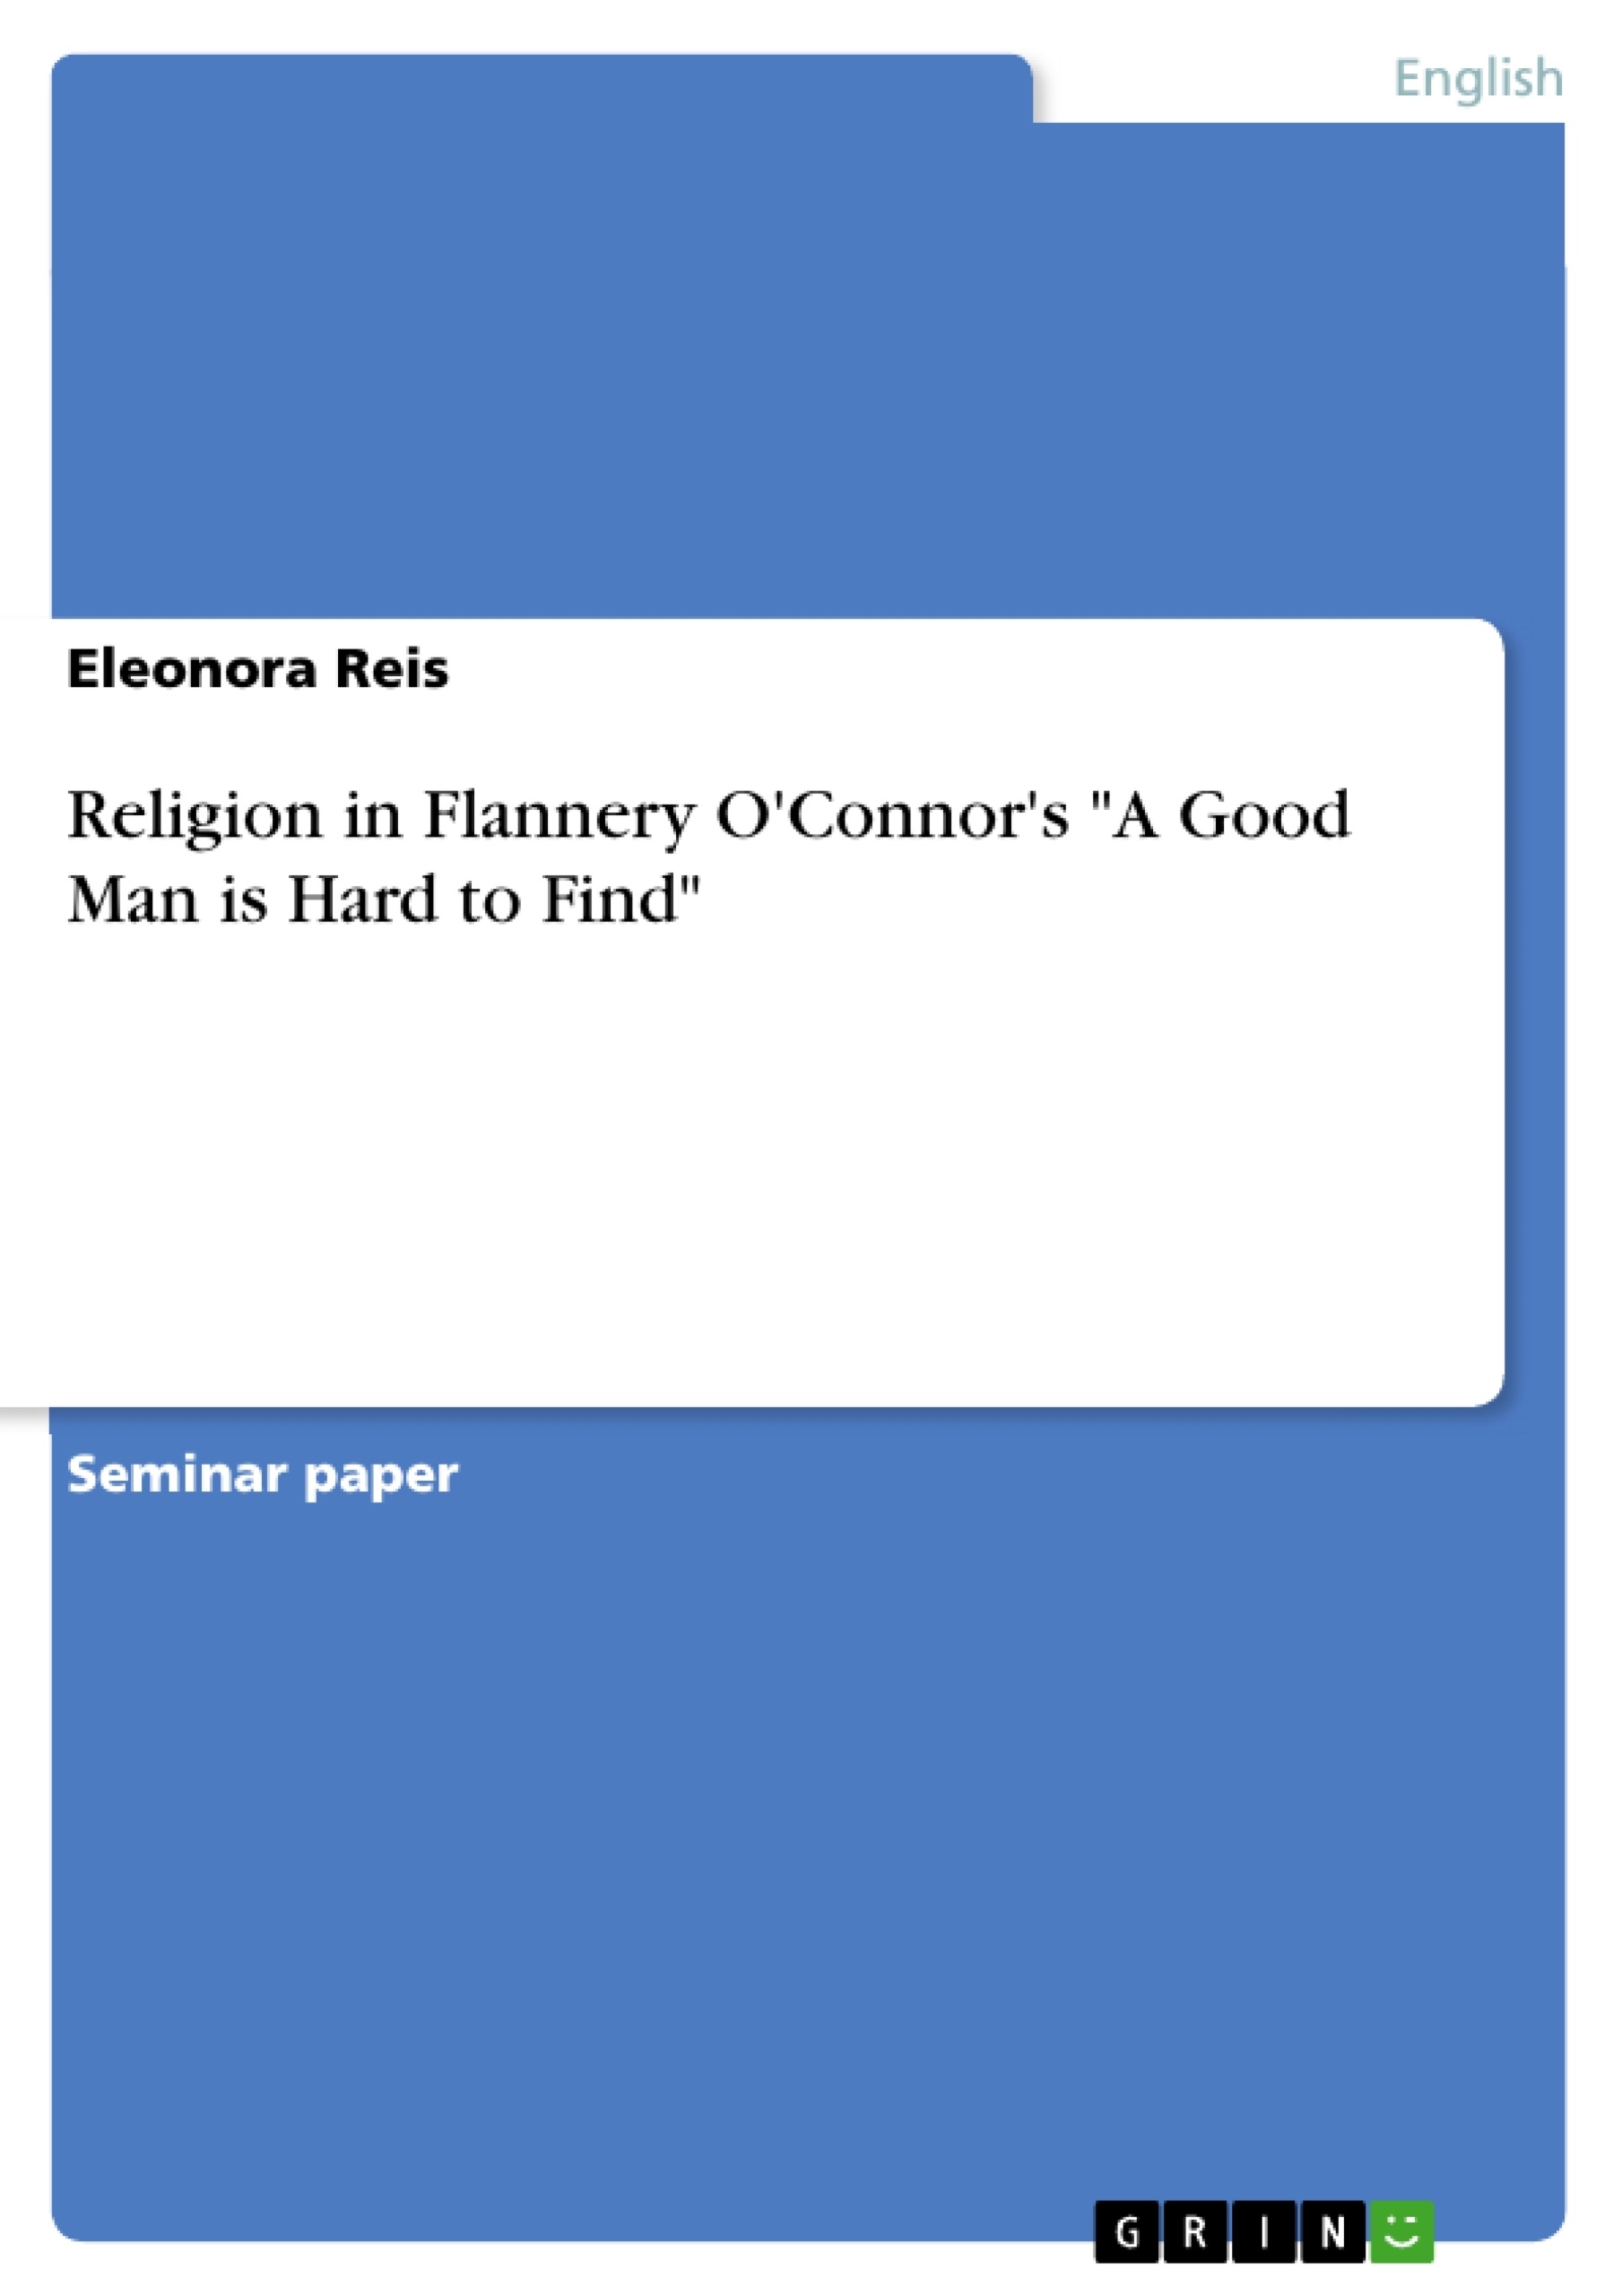 Titre: Religion in Flannery O'Connor's "A Good Man is Hard to Find"